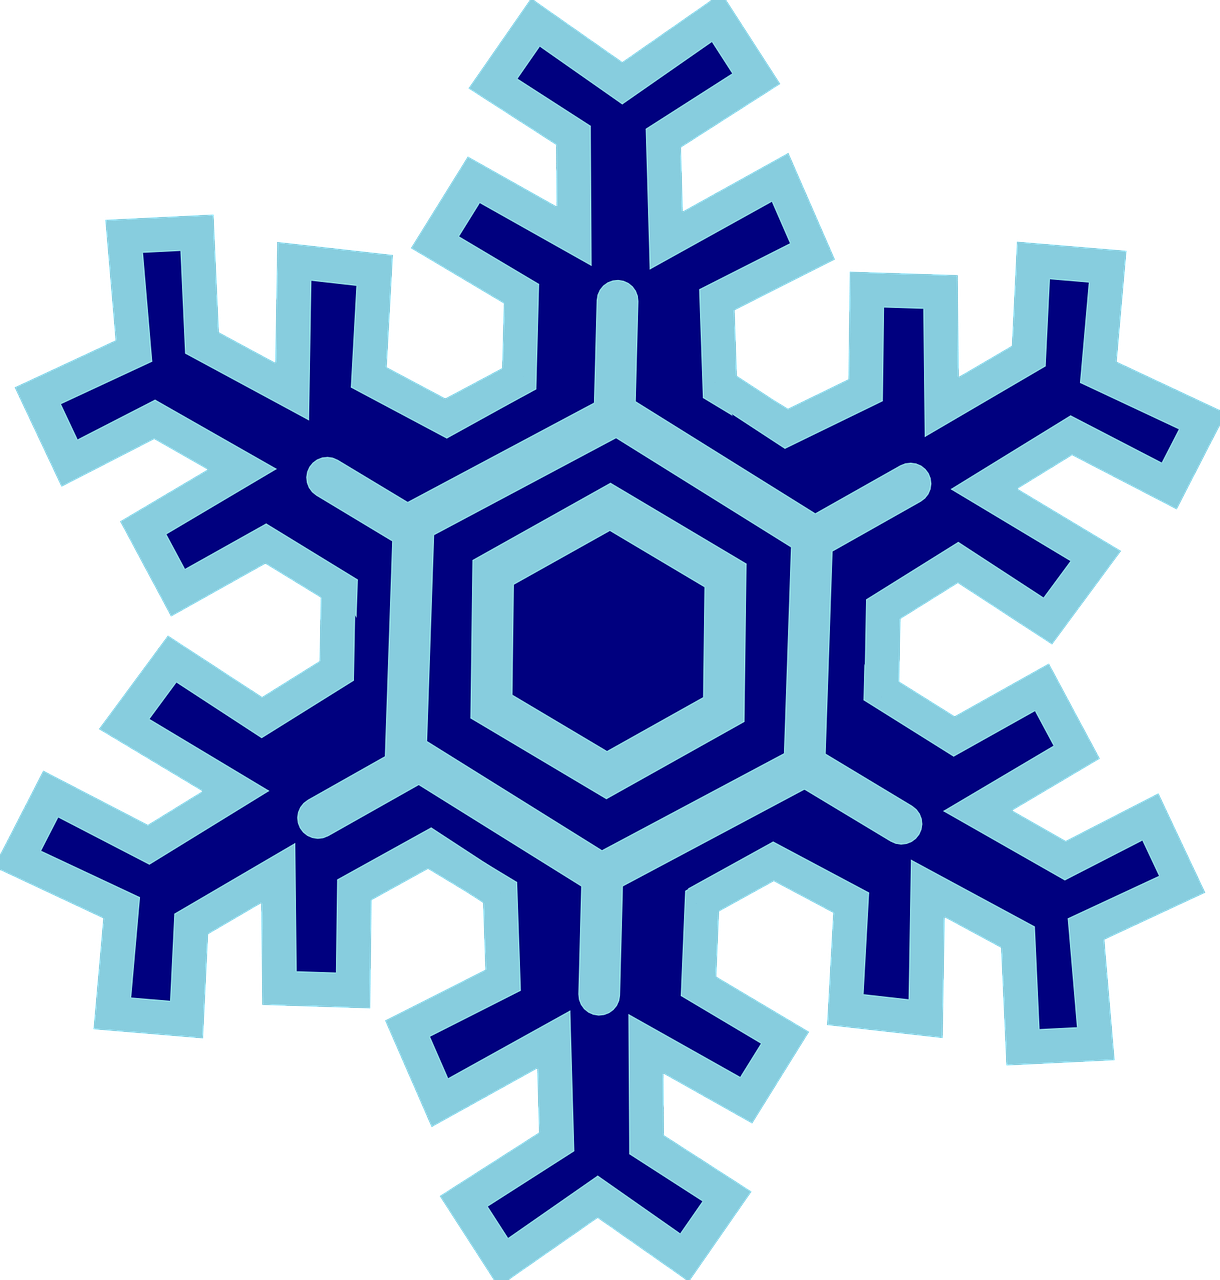 Snowflake Ice Star Frost Cold